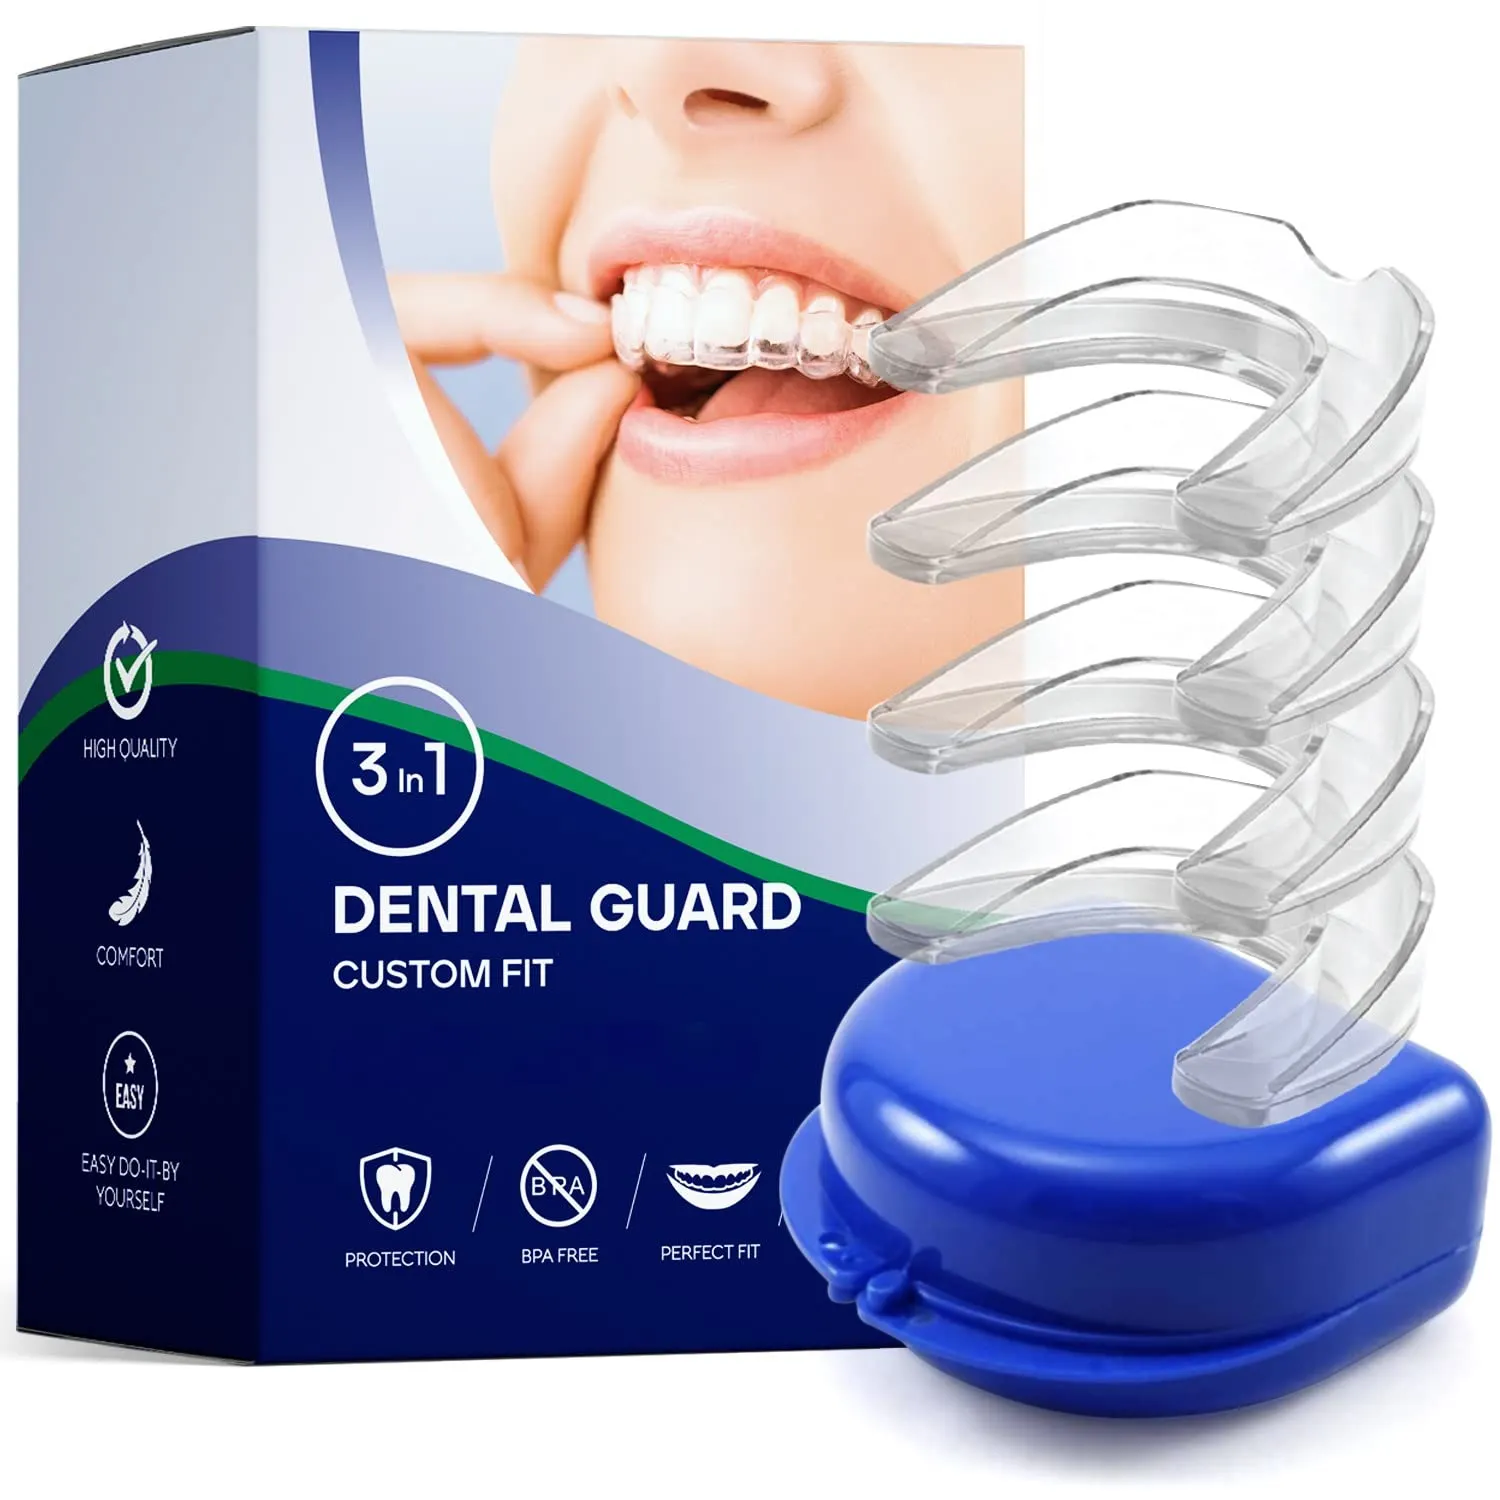 Hot Health Care Mouthpiece Anti Snoring Device Sleeping Aid Mouthguard Silicone Sleeping Mouth Guard with Case Box